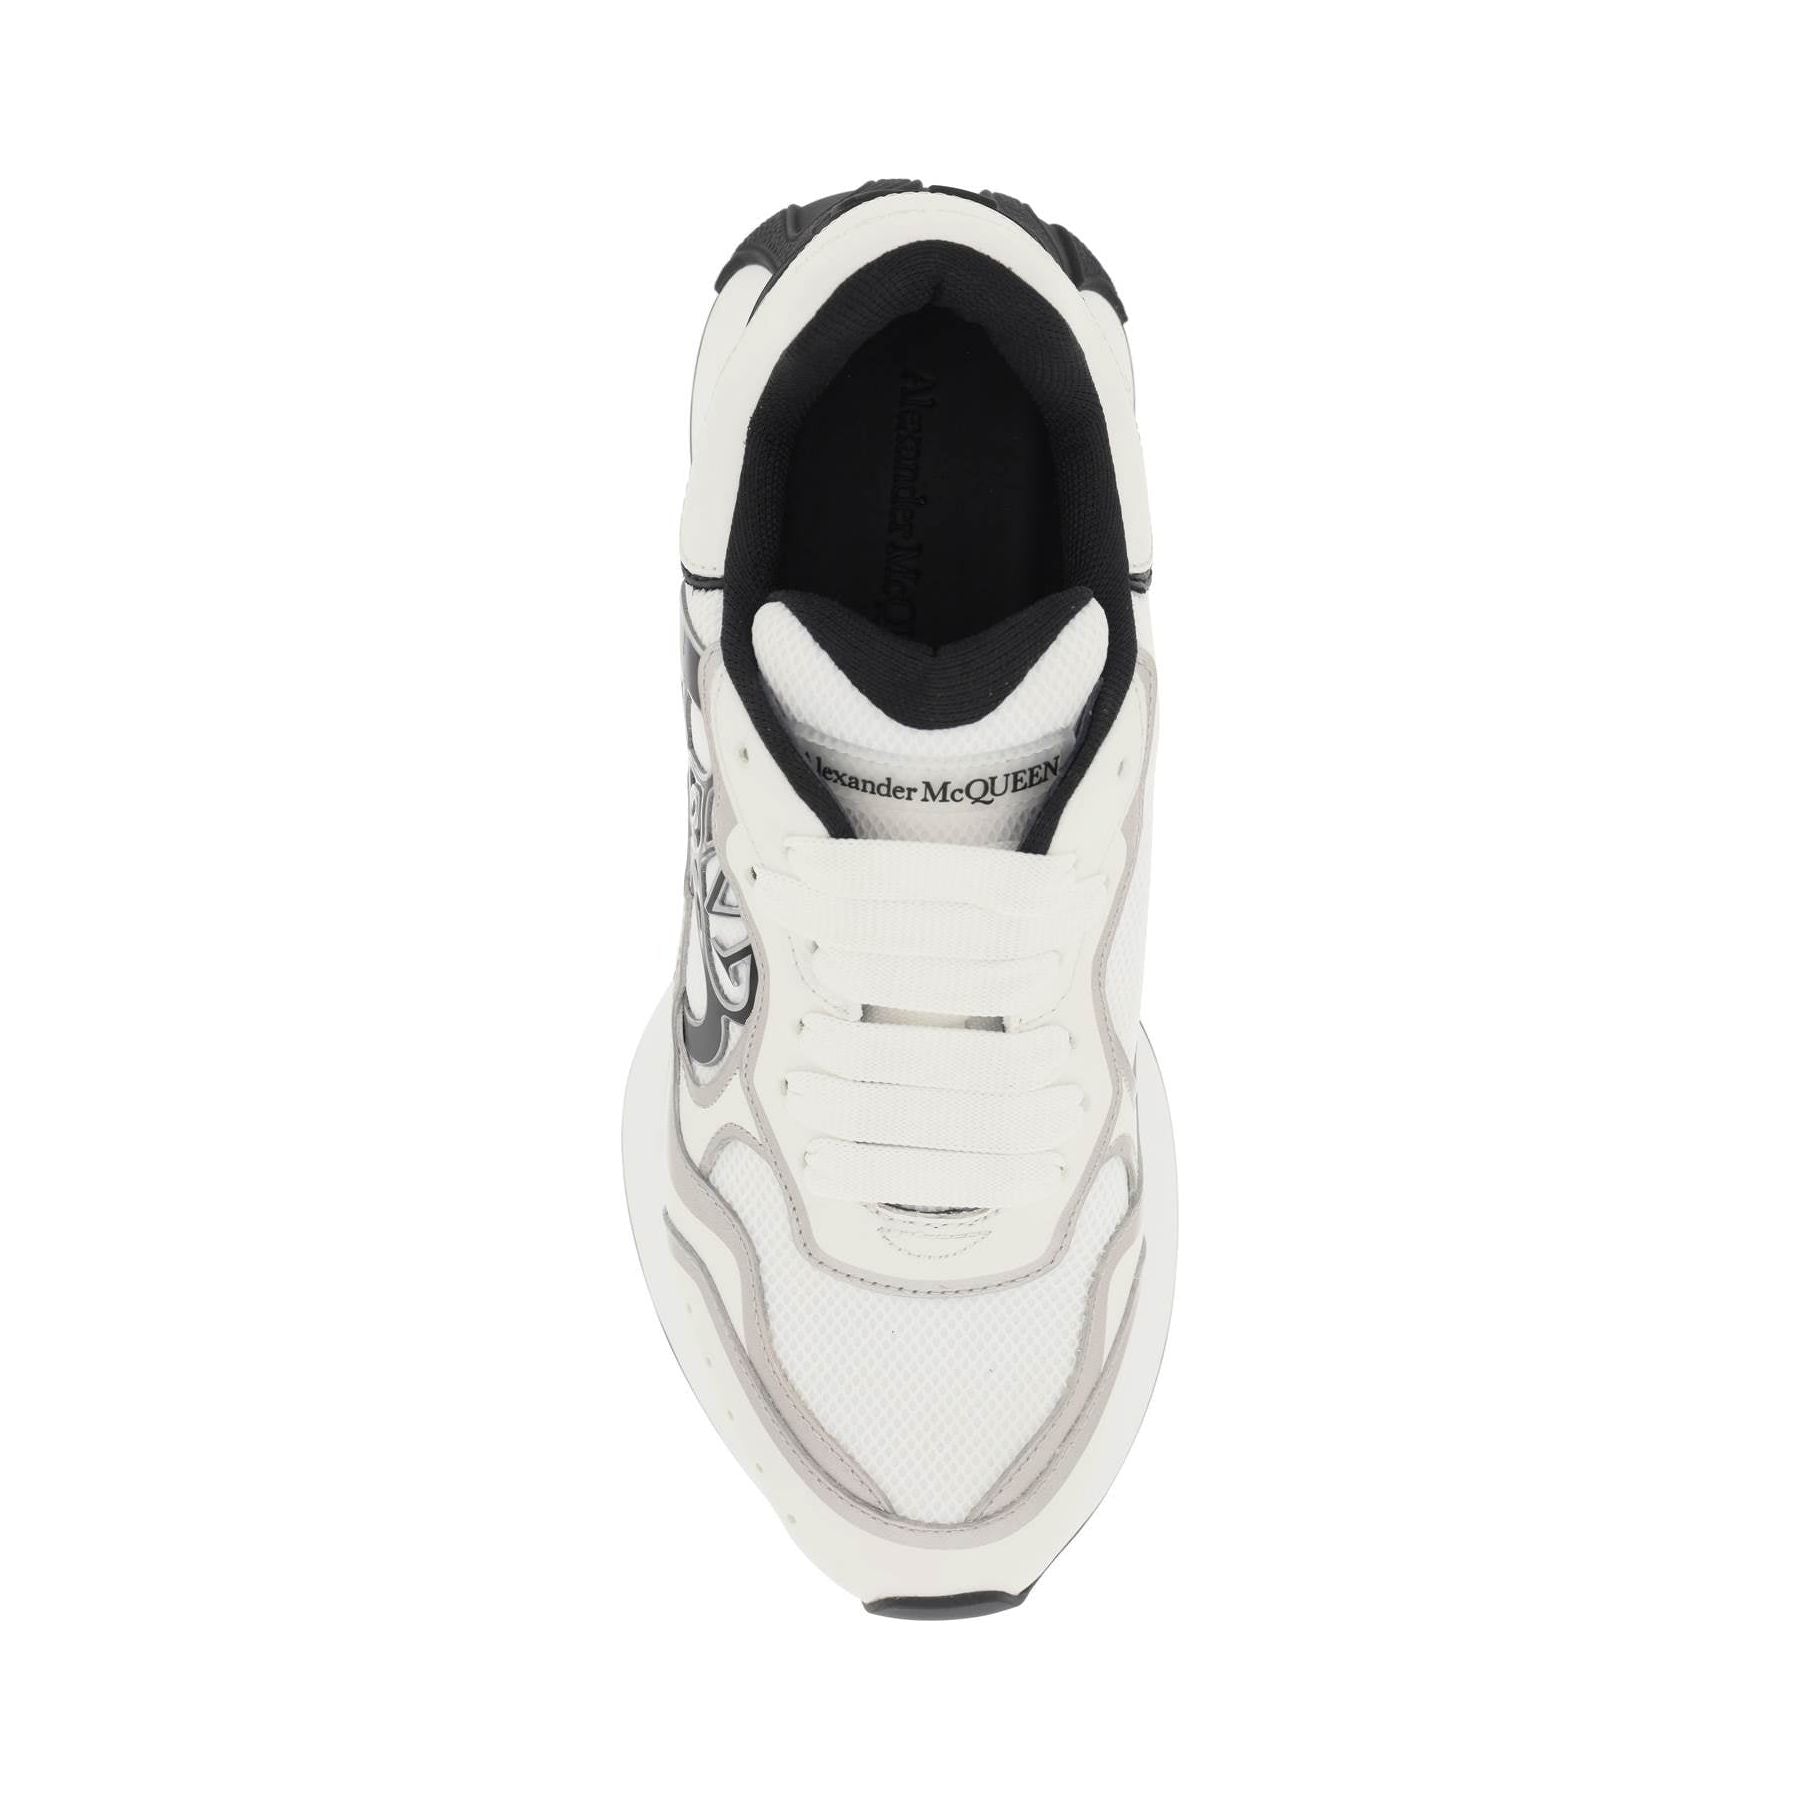 Mesh and Leather Sprint Runner Sneakers